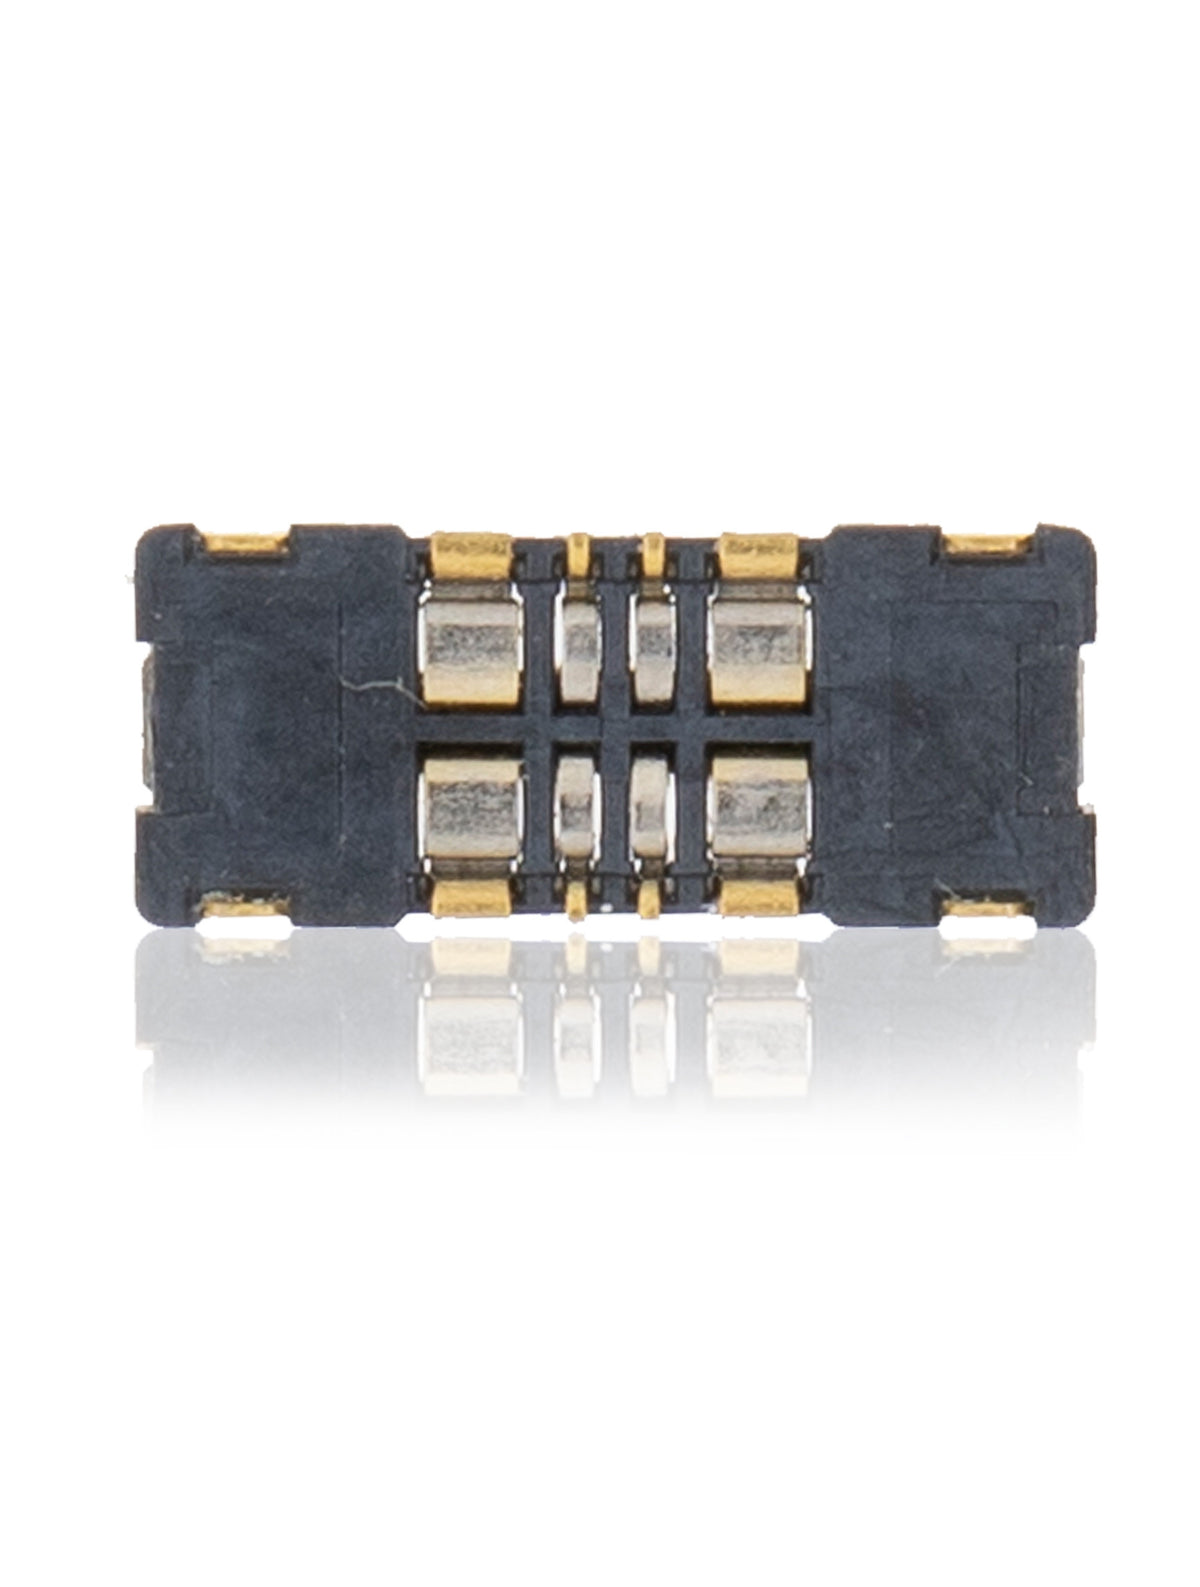 VOLUME BUTTON FLEX FPC CONNECTOR COMPATIBLE WITH IPHONE XS / XS MAX (J3500: 4 PIN)